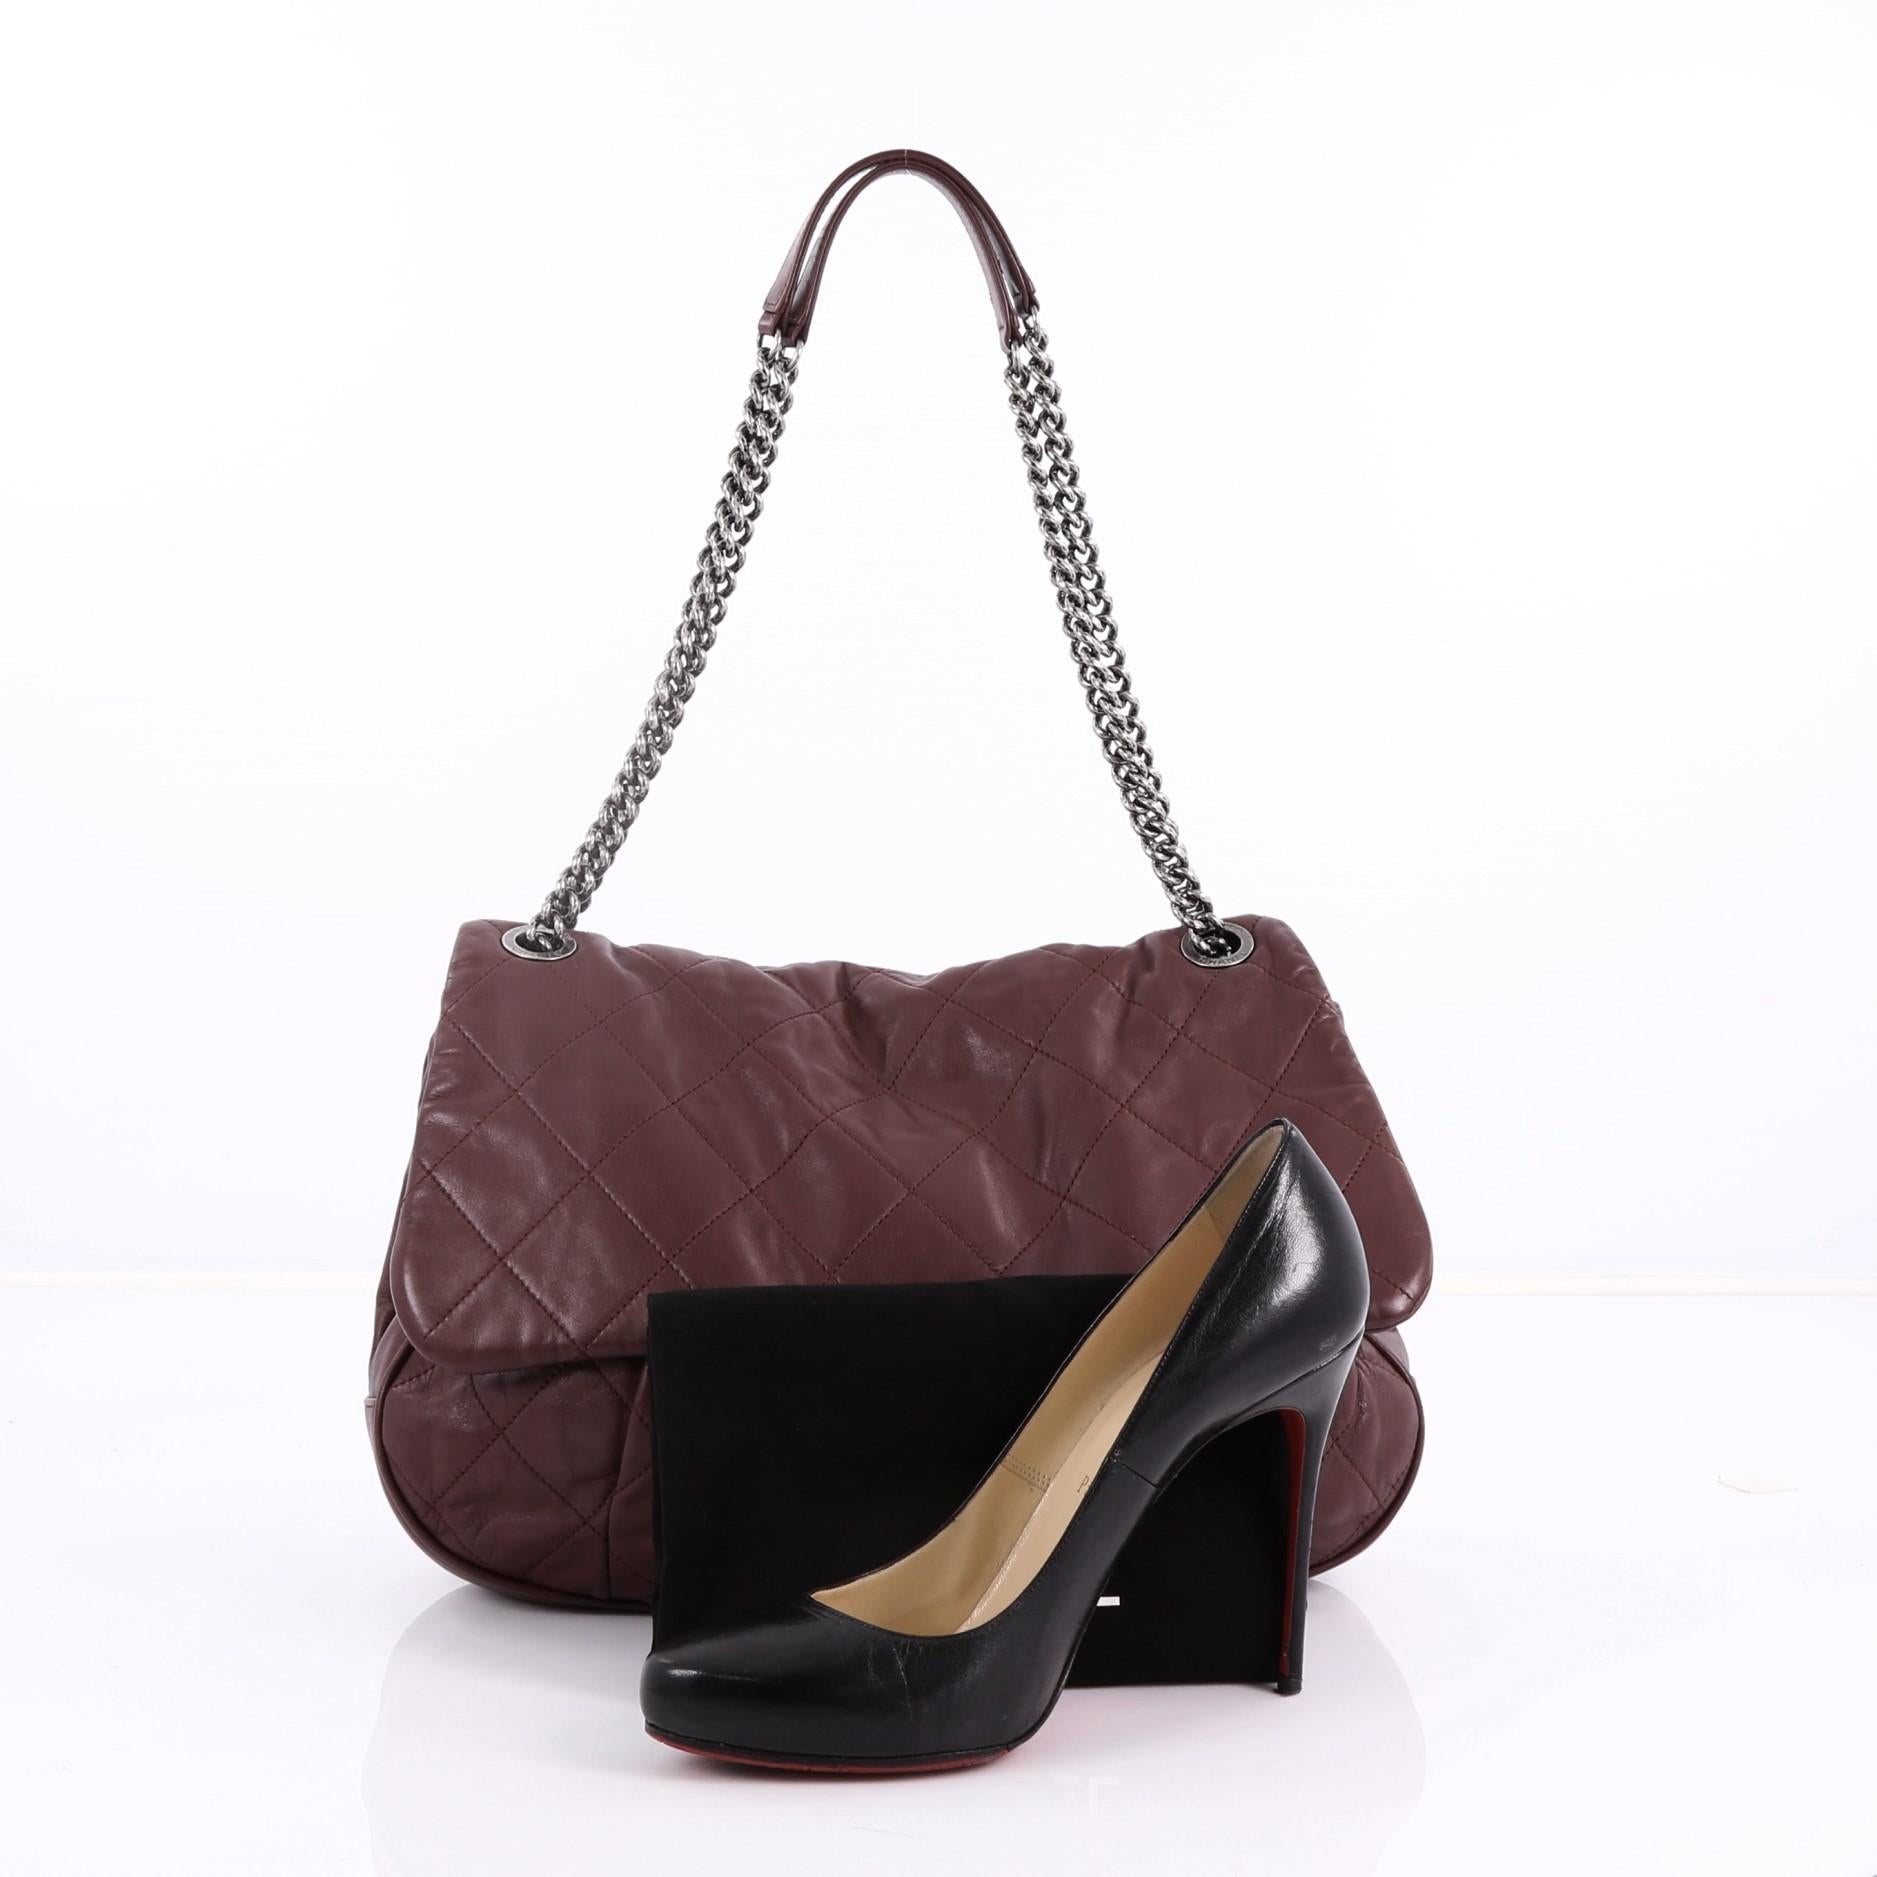 This Chanel Coco Pleats Flap Bag Quilted Calfskin, crafted in burgundy quilted calfskin leather, features dual chain link strap with leather pads, frontal flap, and aged-silver hardware. Its CC turn lock closure opens to a gray fabric interior